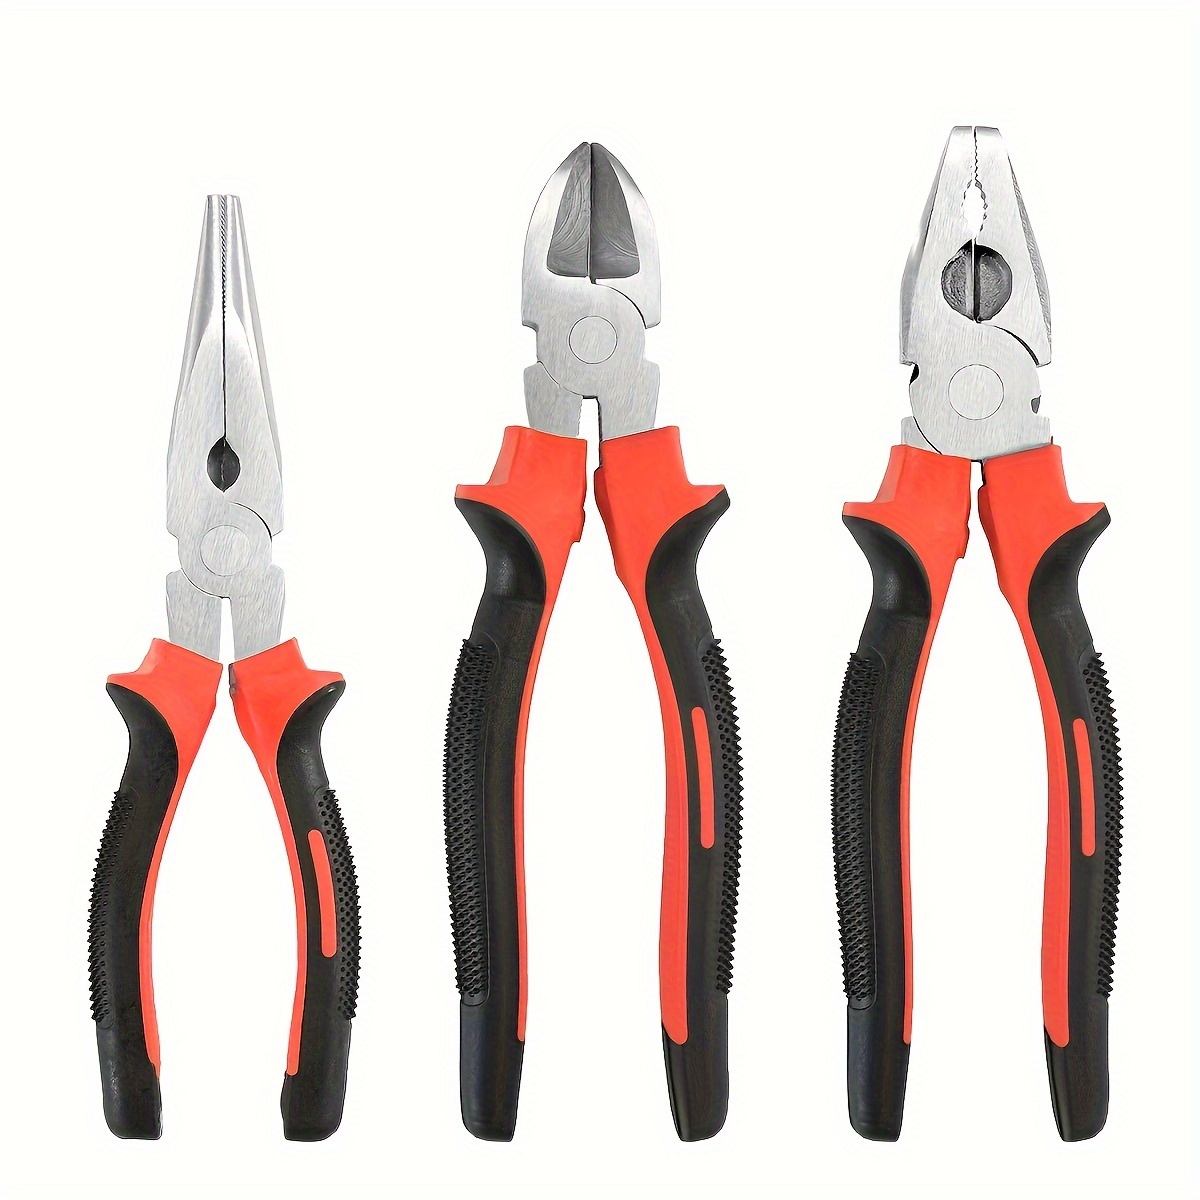 

3pcs Small Plier Set, Pliers Tool Set, 7inches Combination Pliers, 7inches Diagonal Cutting Pliers, 7inches Needle Nose Pliers